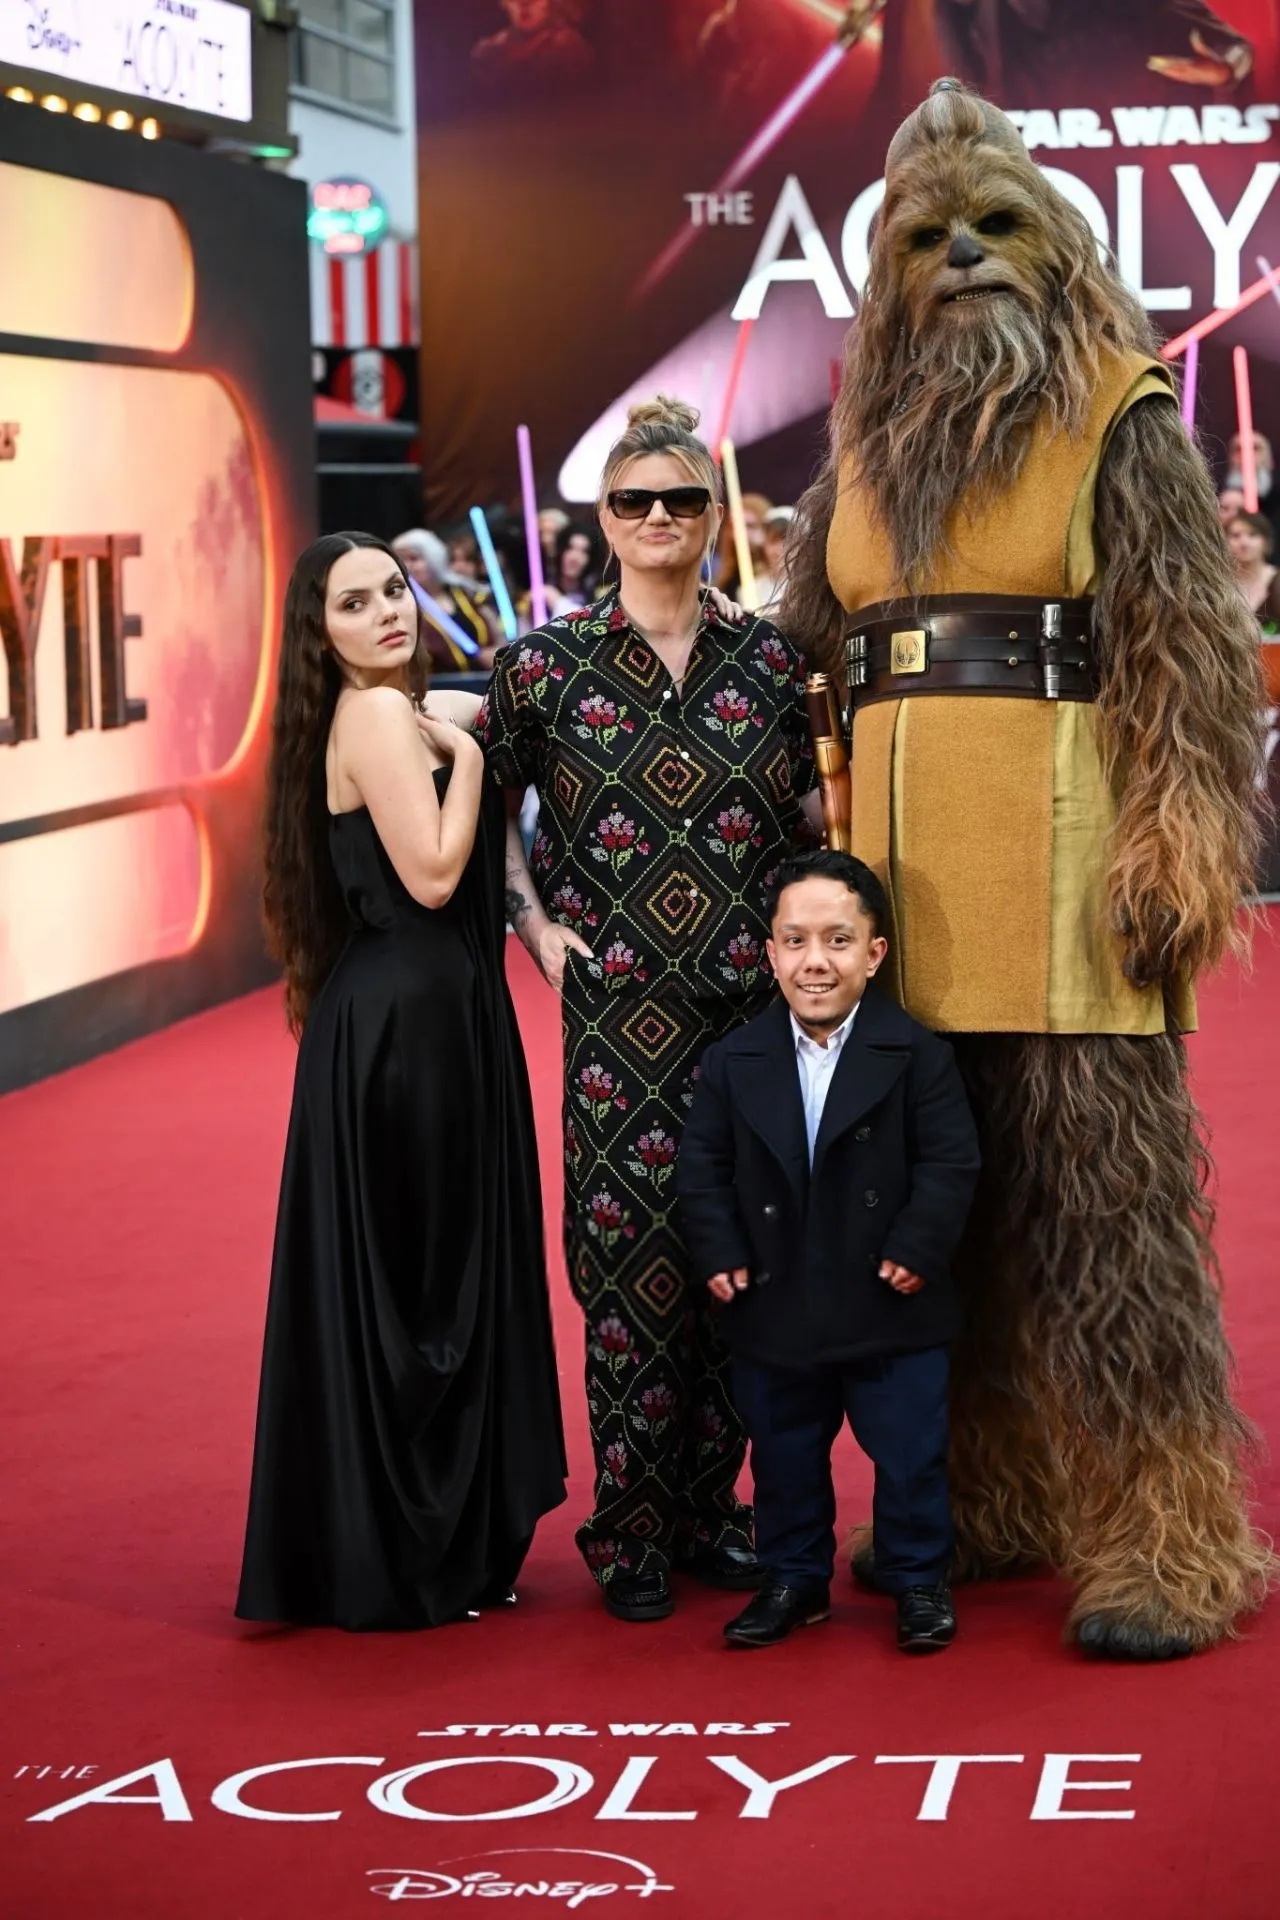 DAFNE KEEN AT STAR WARS THE ACOLYTE PREMIERE IN LONDON10